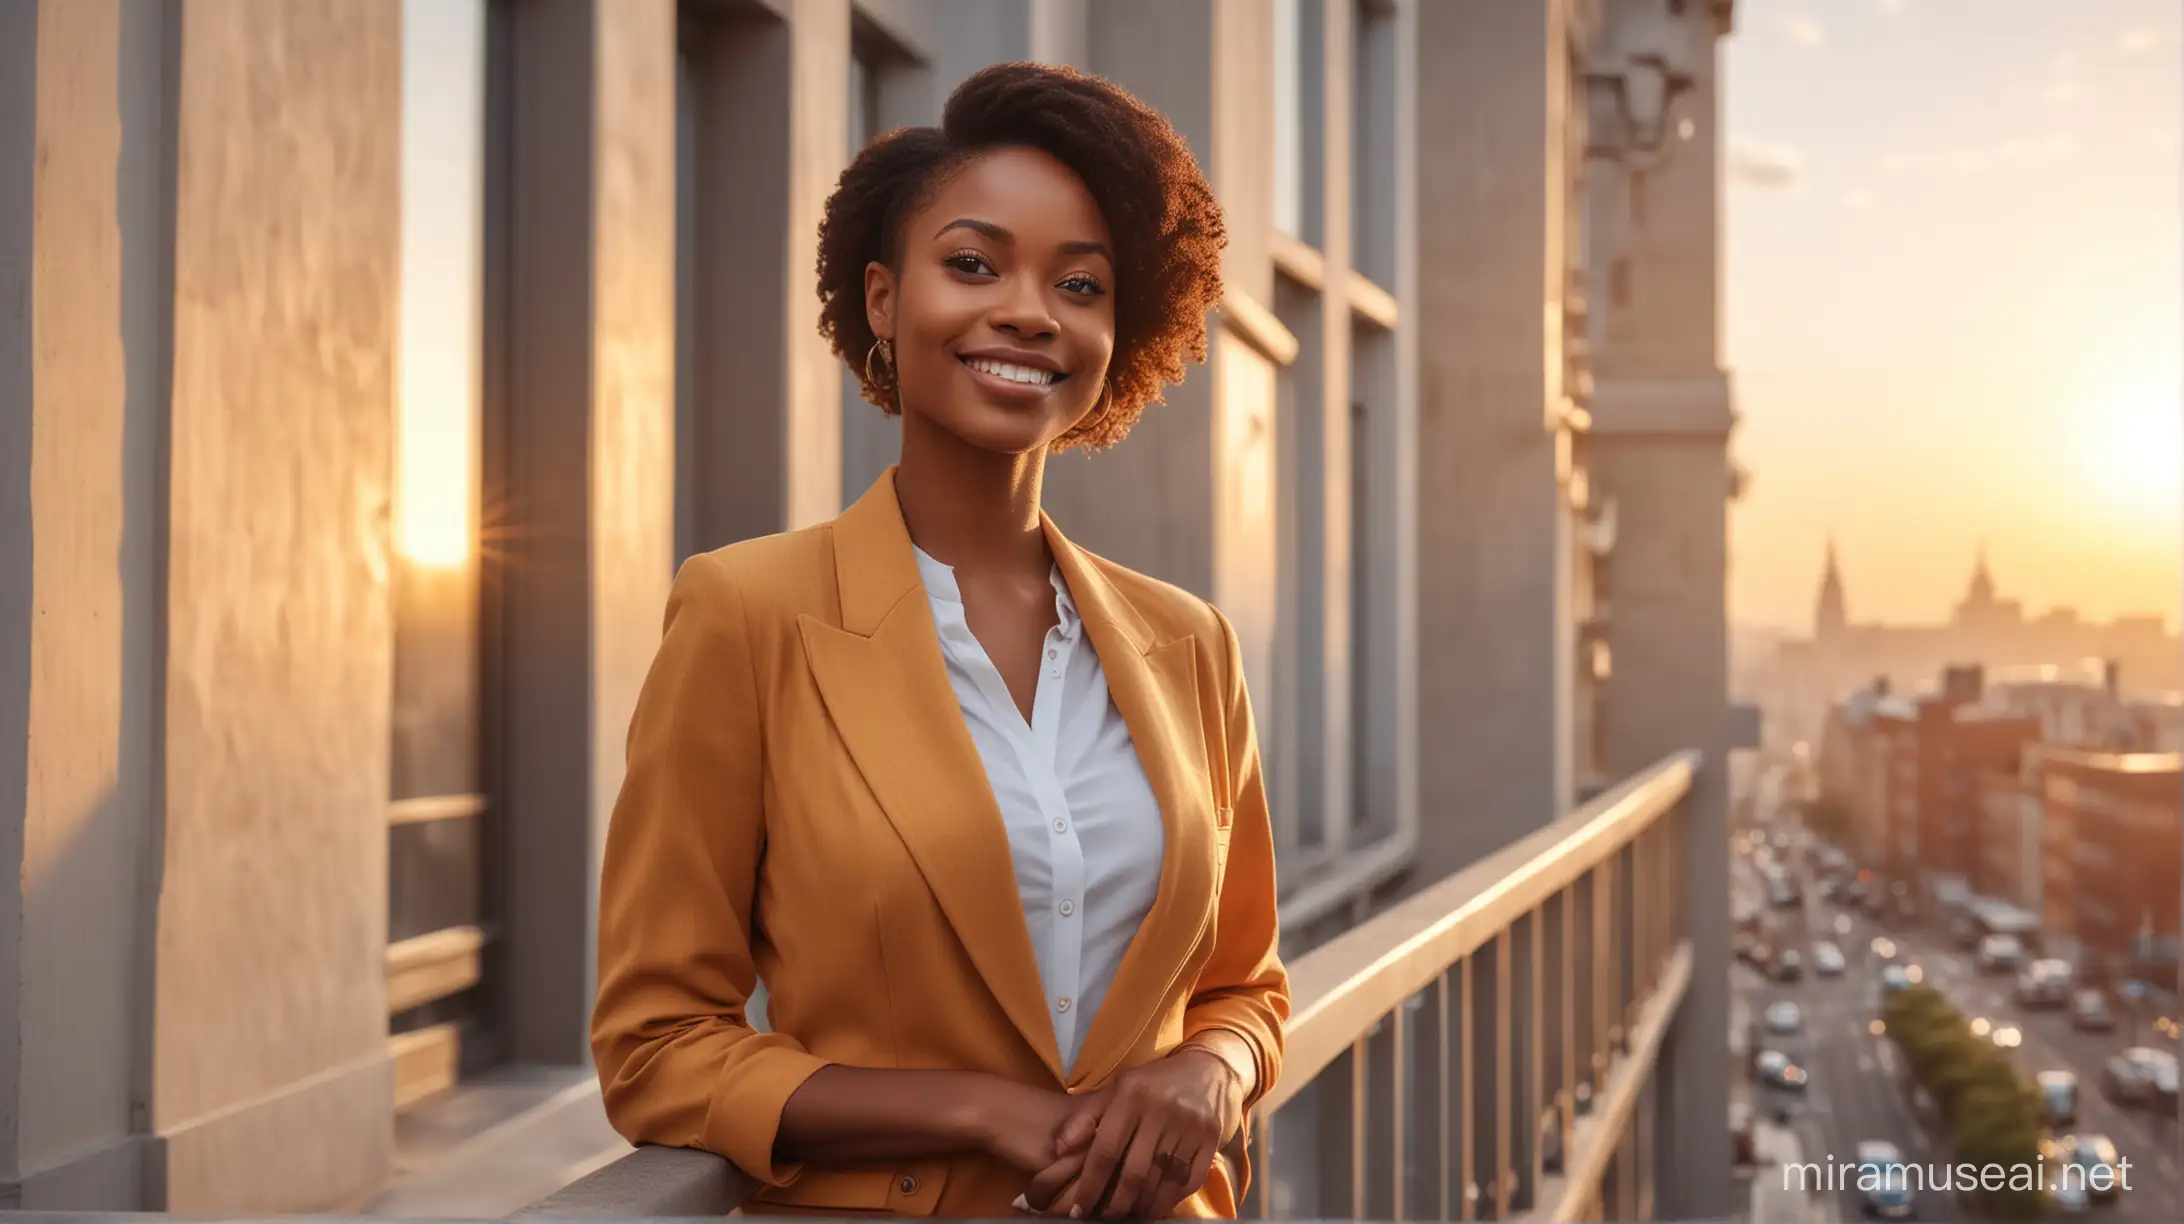 realistic image of a beautiful African American smartly dressed woman standing tall on the balcony of a city building against the backdrop of a beautiful sunrise with a smile on her face while looking on the side